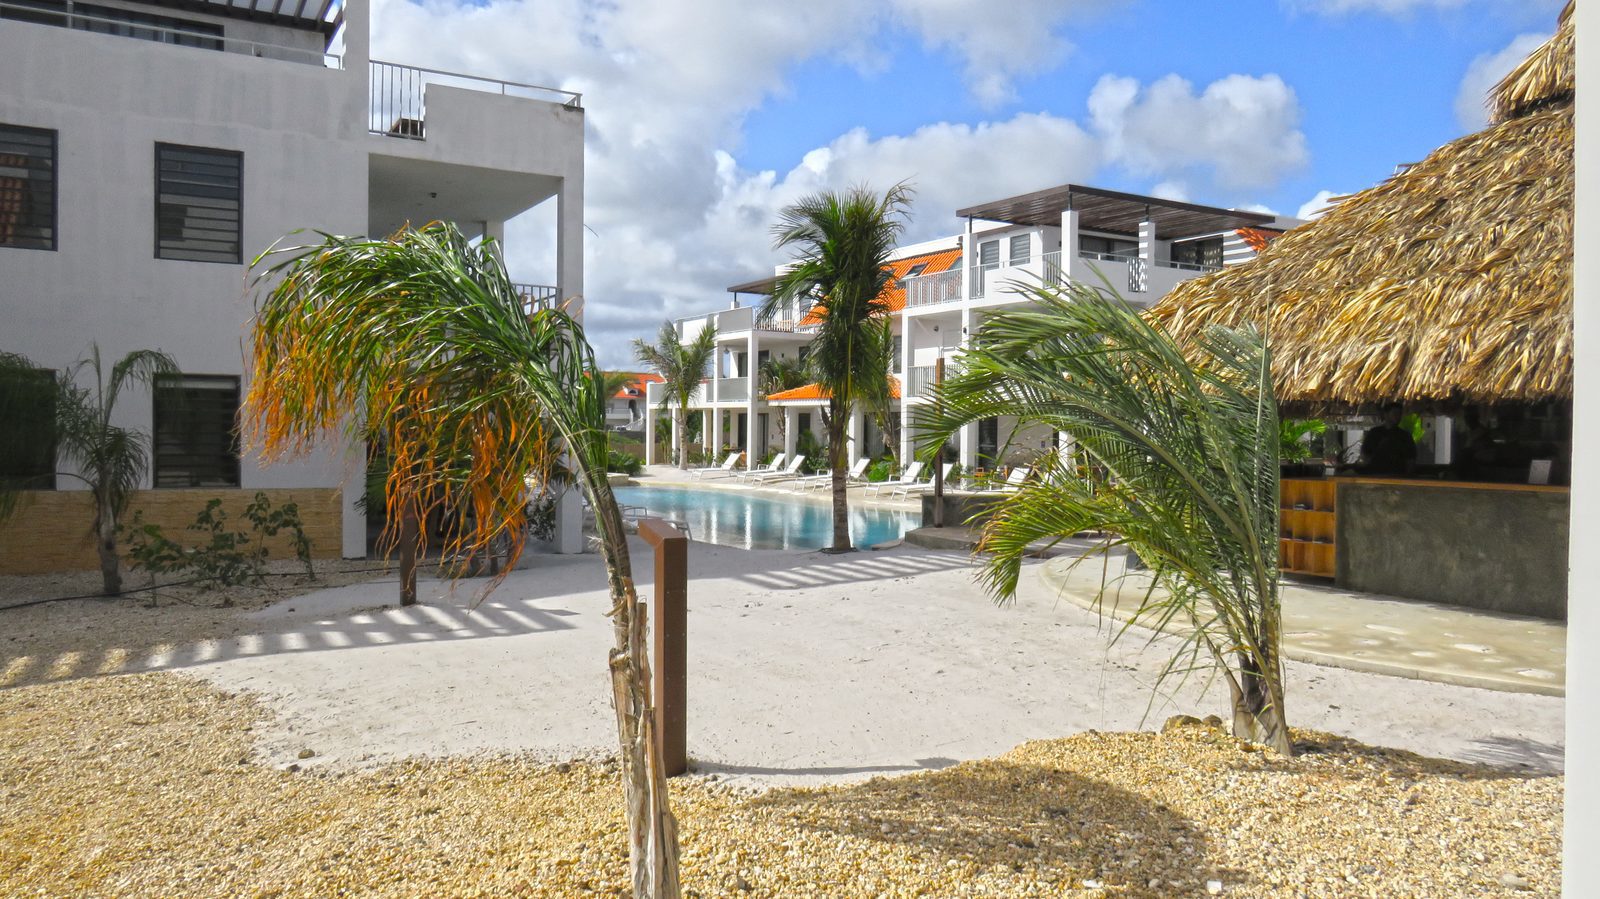 Looking for accommodations on Bonaire? Take a look at the available accommodations at our resort. Child-friendly, luxurious apartments, equipped with all the comforts you could wish for!